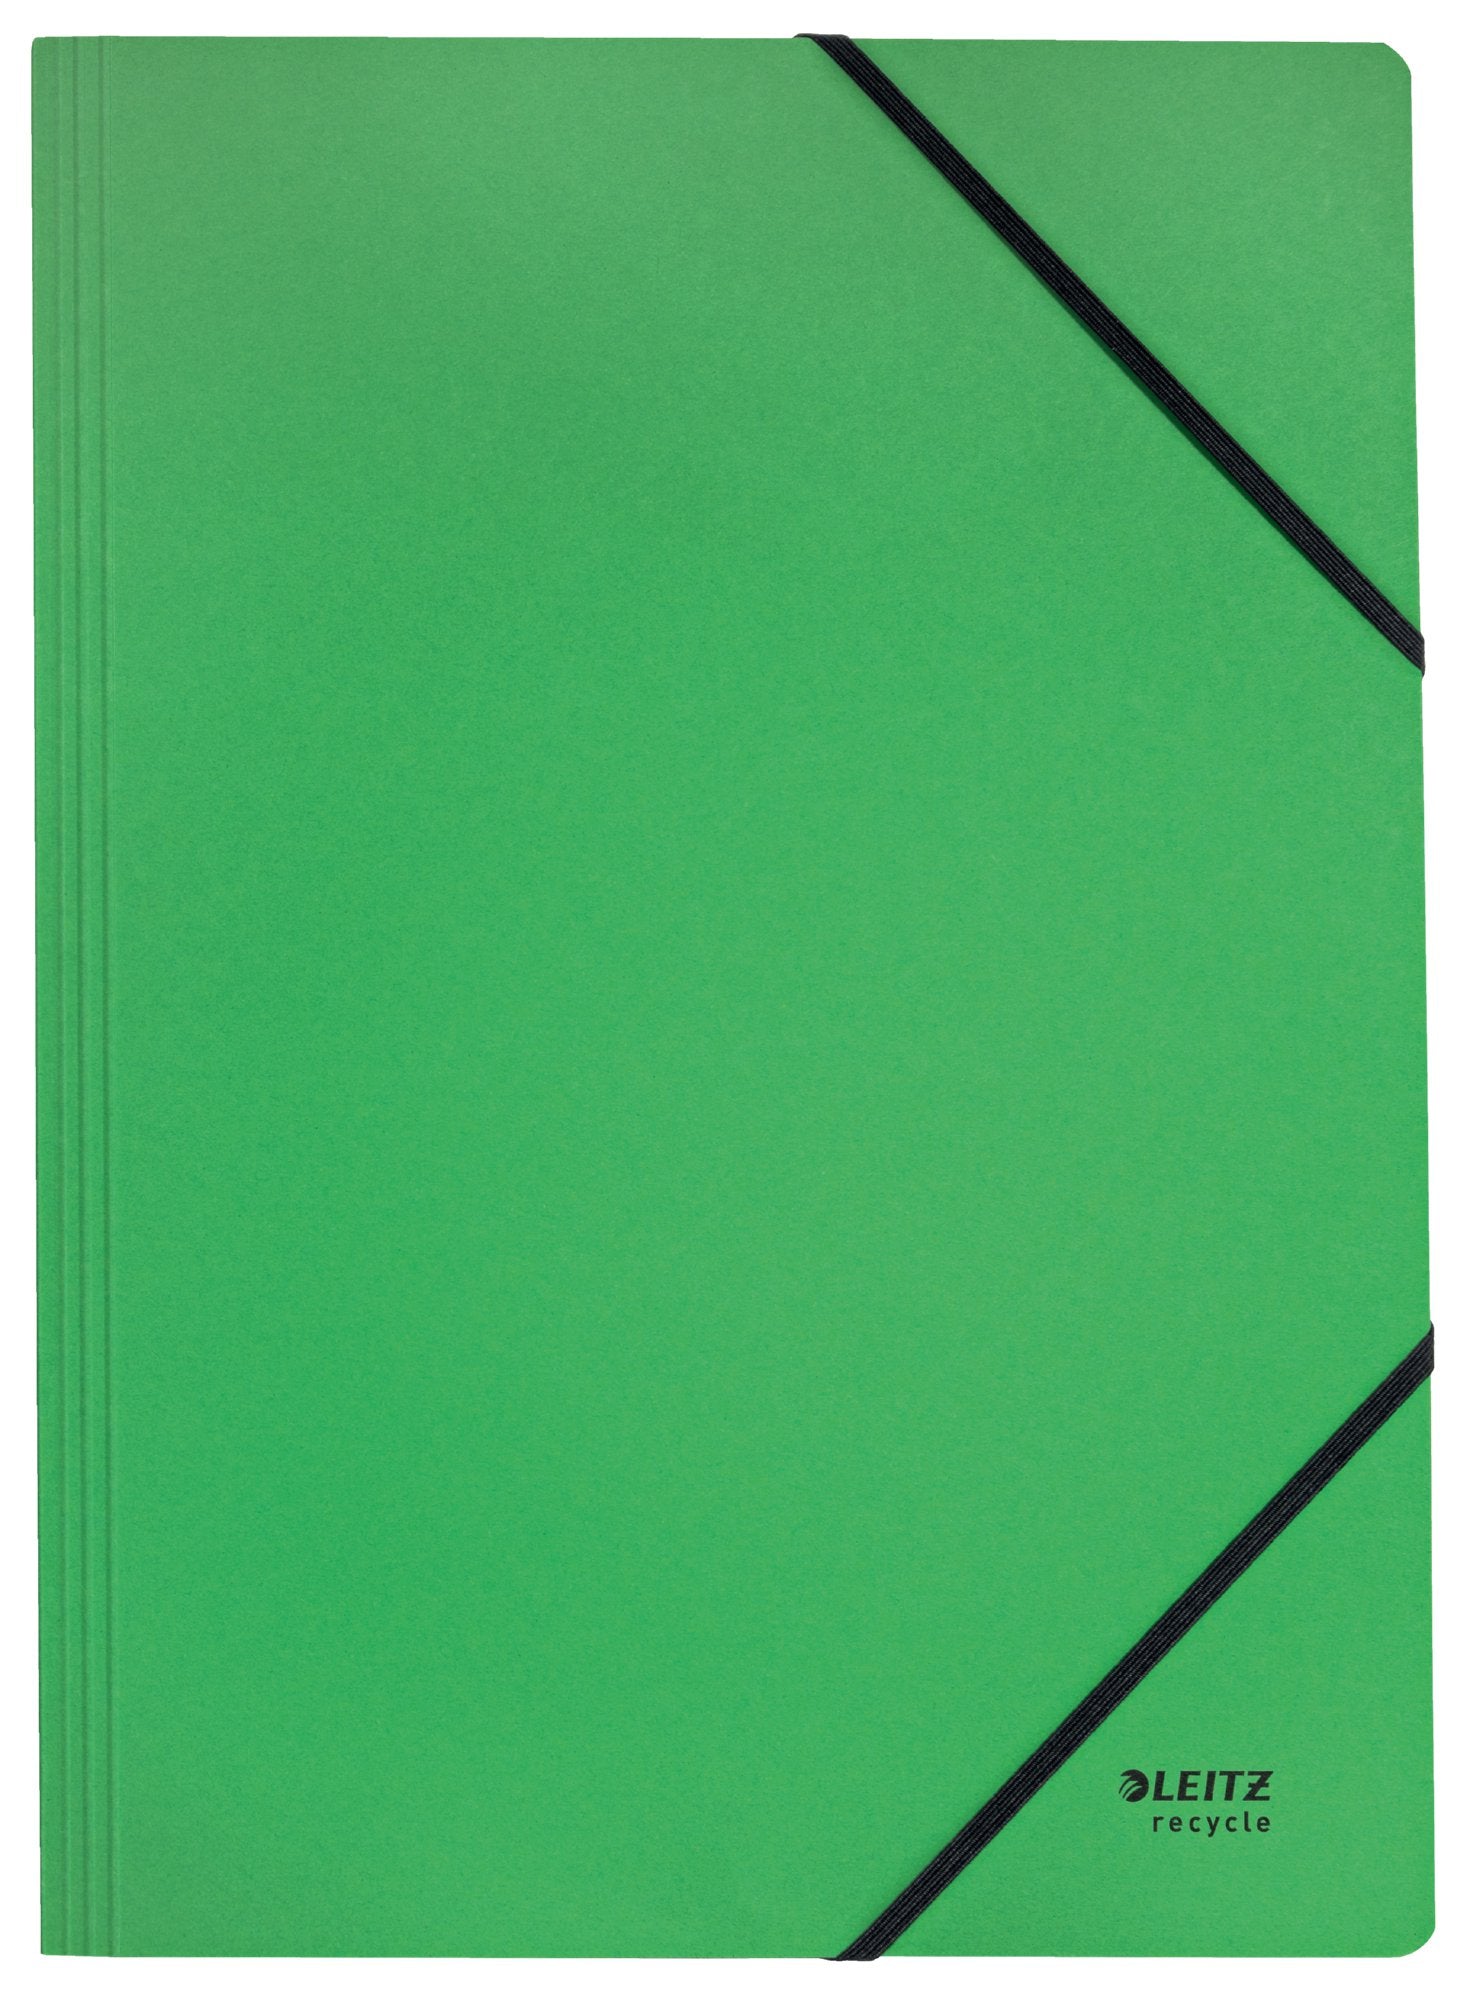 Leitz Recycle Card Folder With Elastic Band Closure A4 Green 39080055 - NWT FM SOLUTIONS - YOUR CATERING WHOLESALER